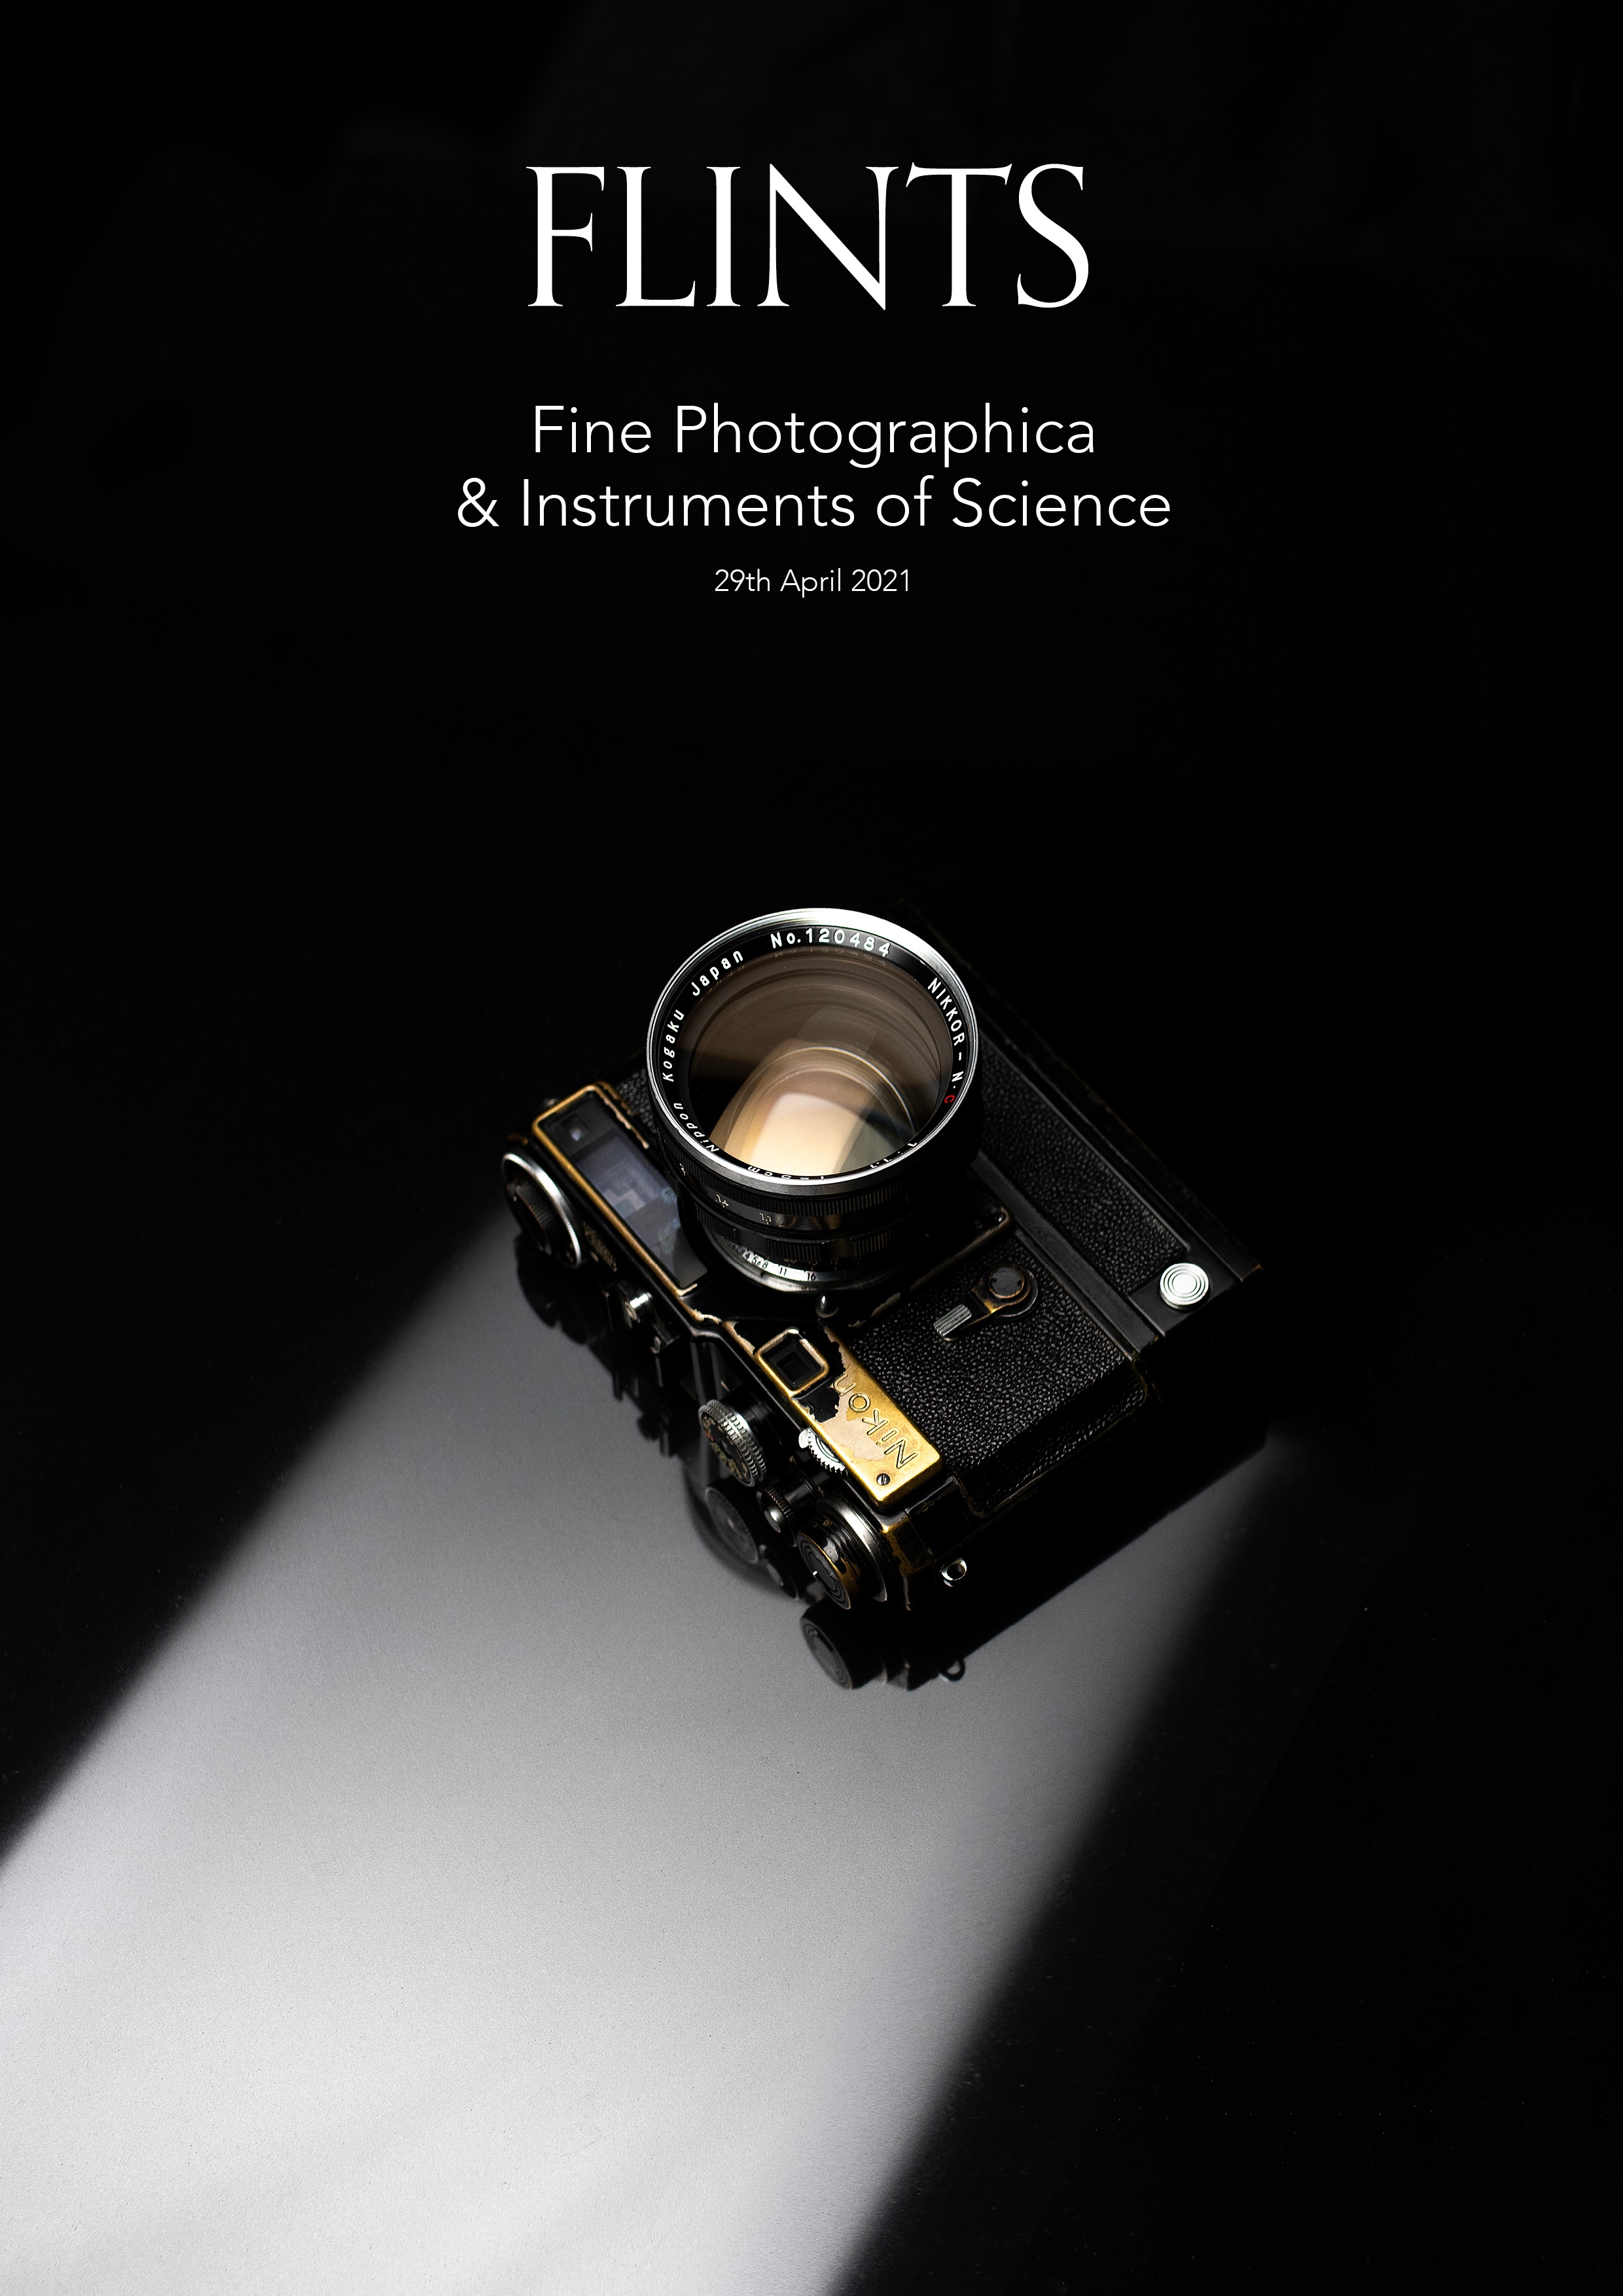 Fine Photographica & Instruments of Science